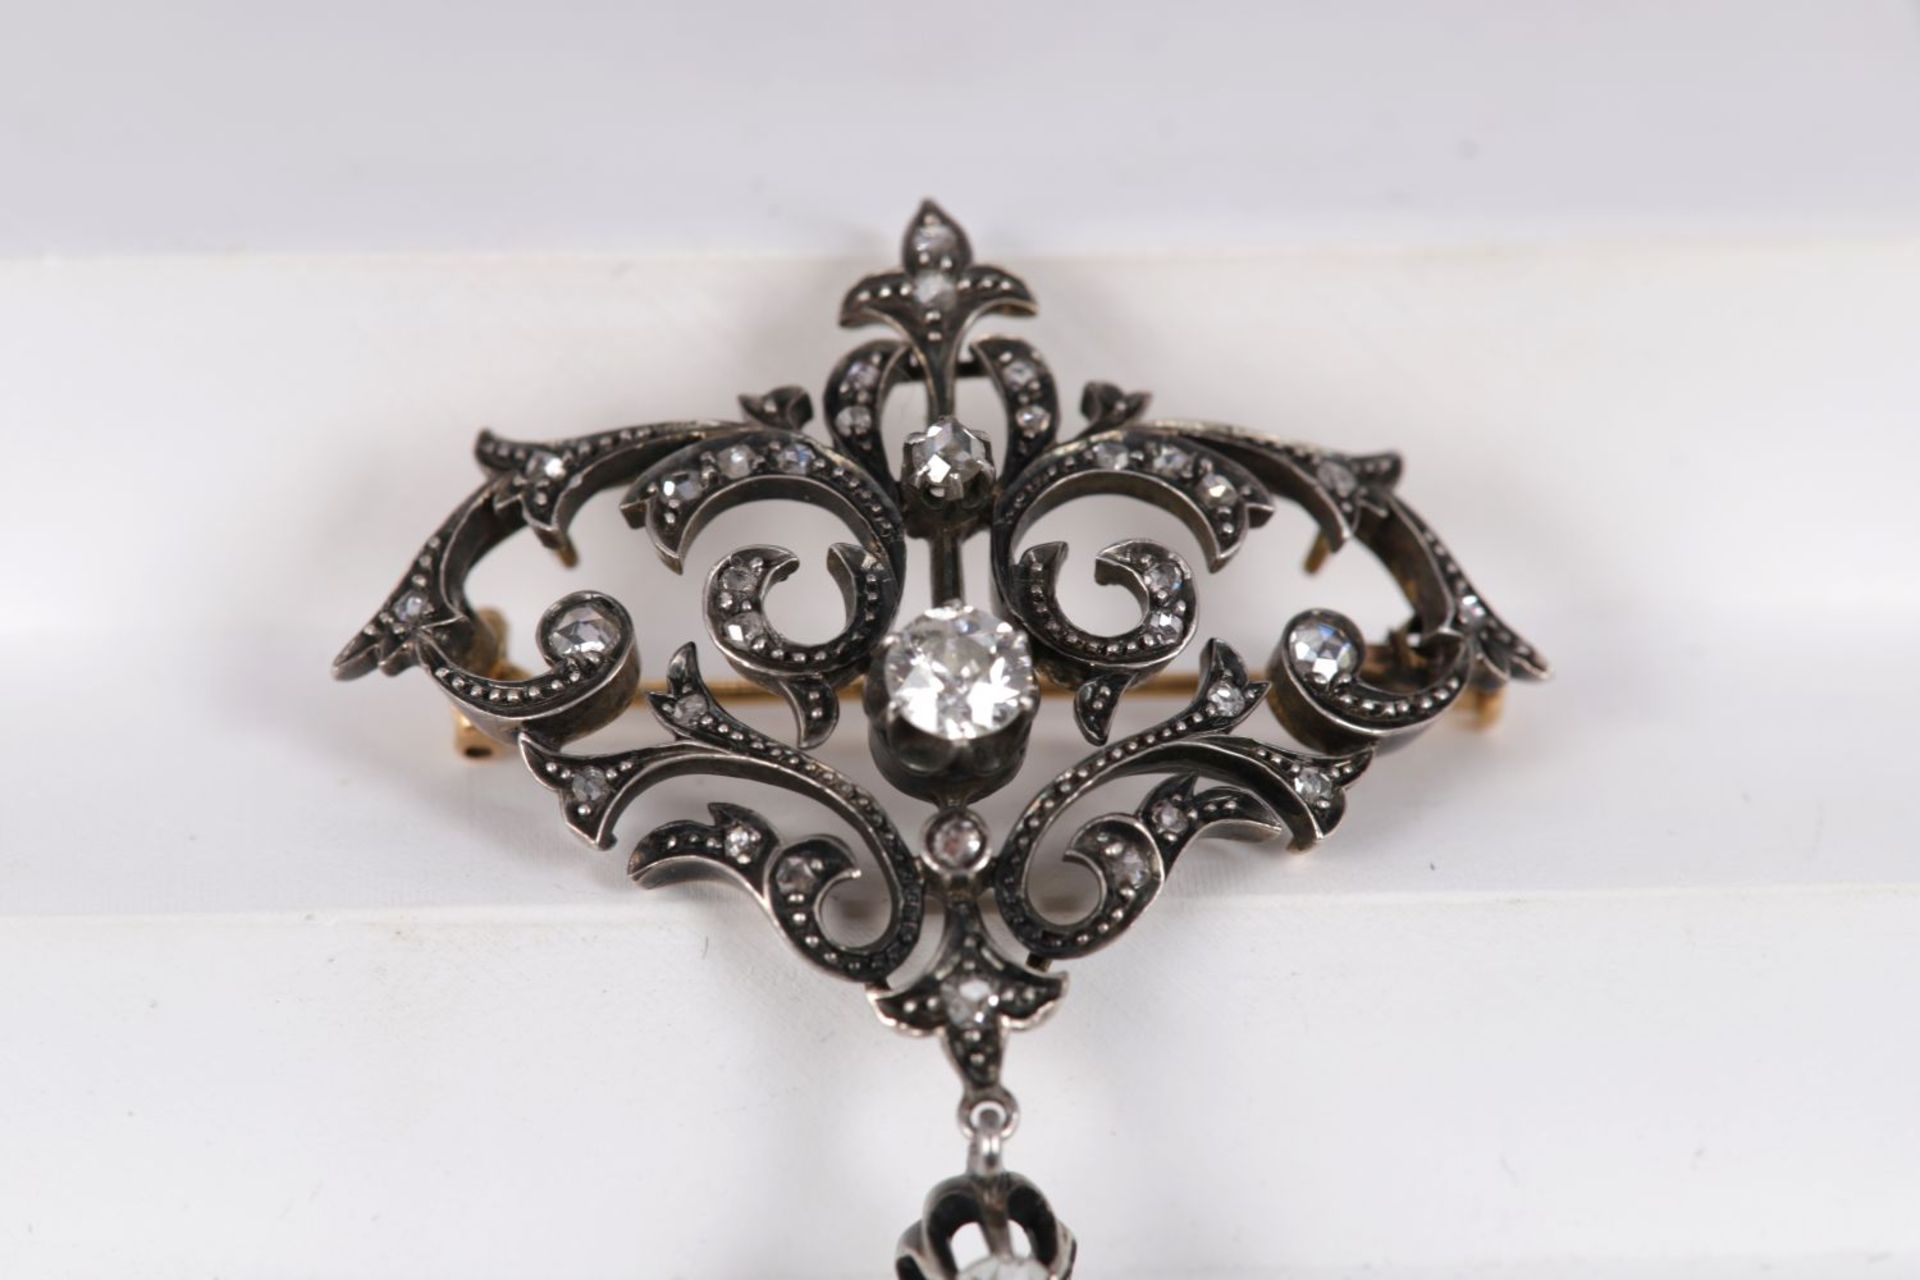 GOLD, DIAMOND & SILVER VOLUTE BROOCH - Image 2 of 3